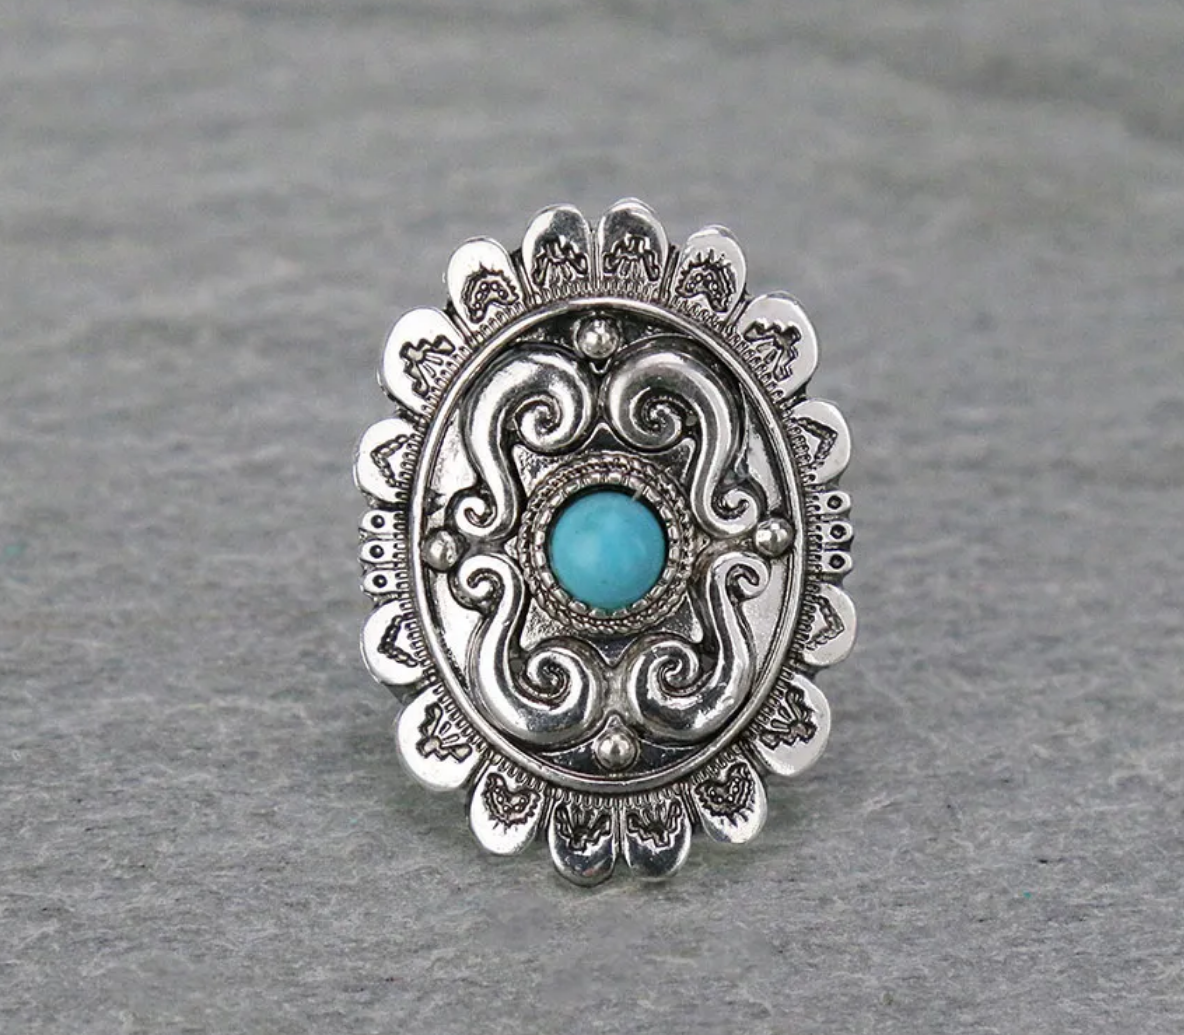 Western Concho Stone Adjustable Ring